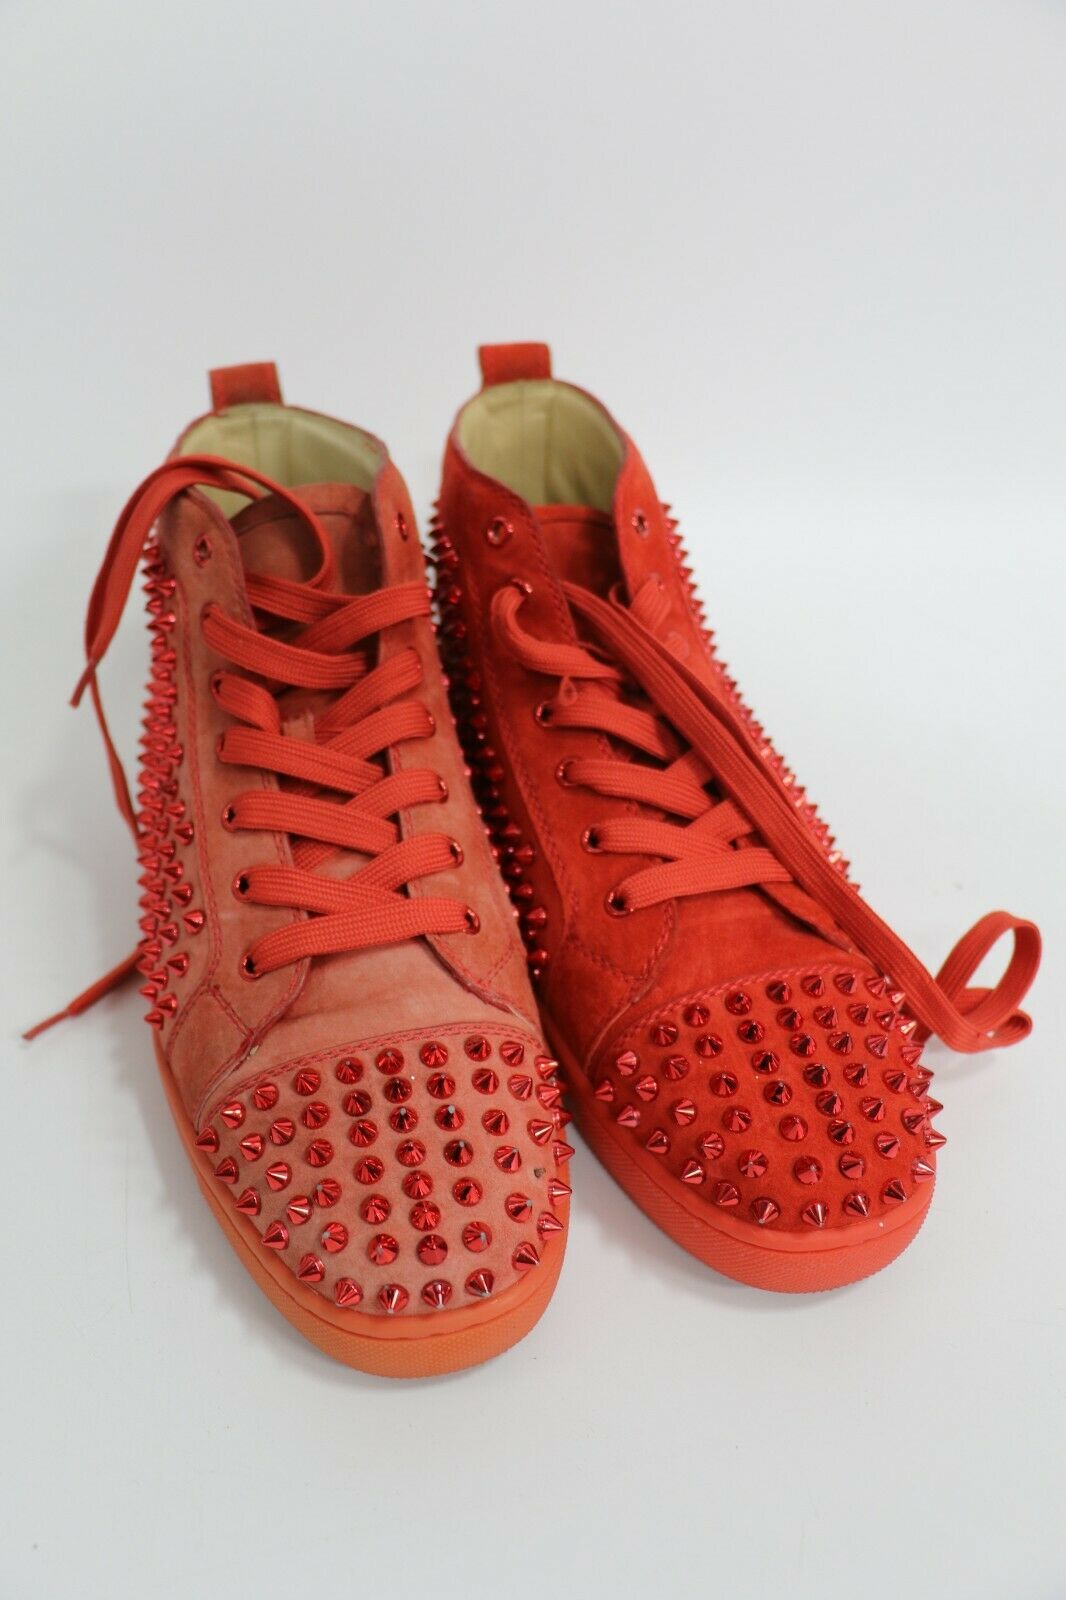 Christian Louboutin Red Suede Louis Spike High Top Sneakers Size 40.5  Christian Louboutin